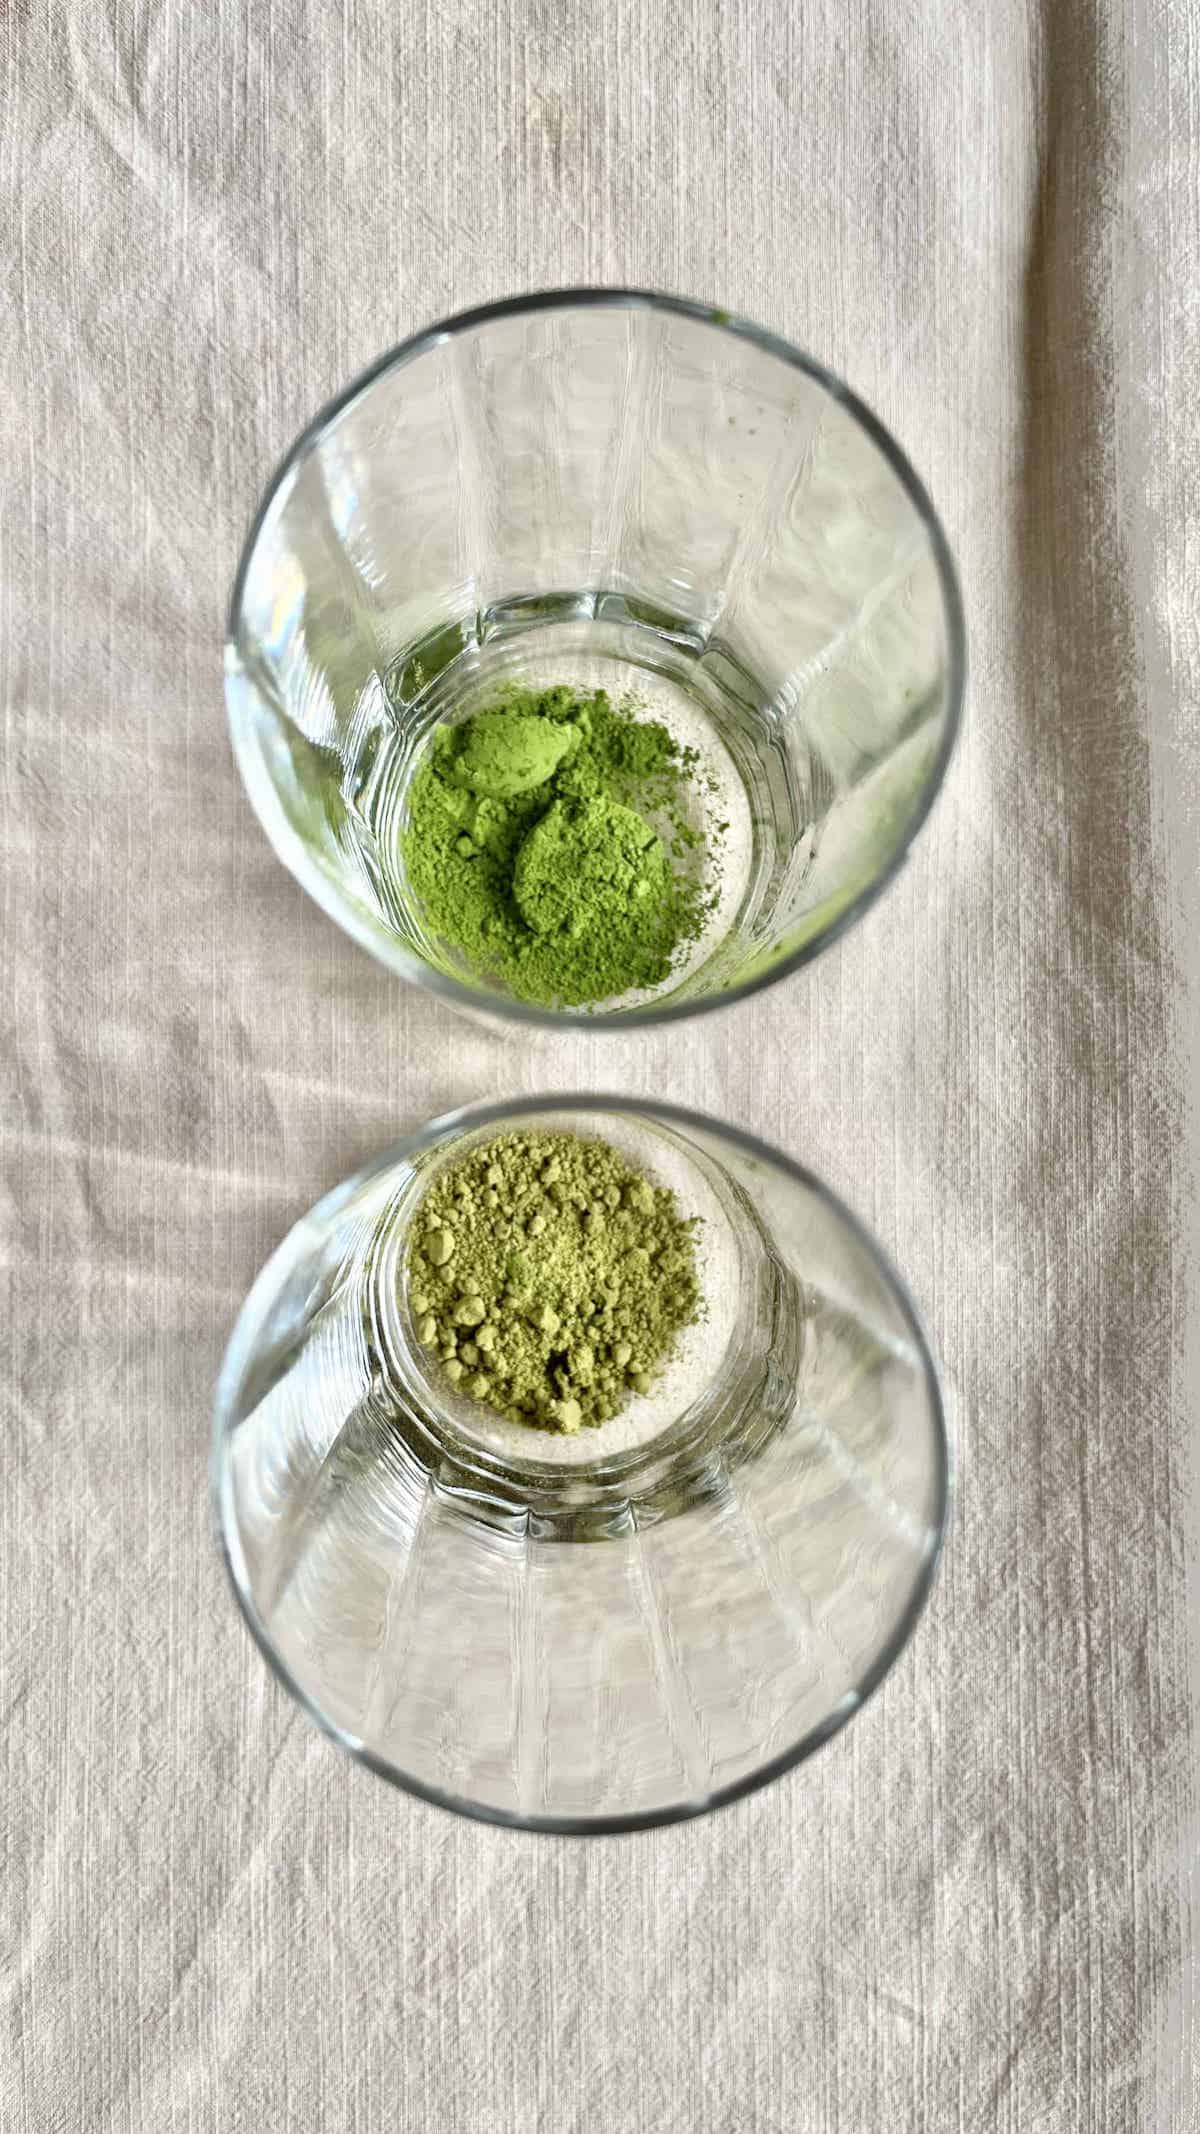 Comparing fresh and stale matcha powders, which are different shades of green.